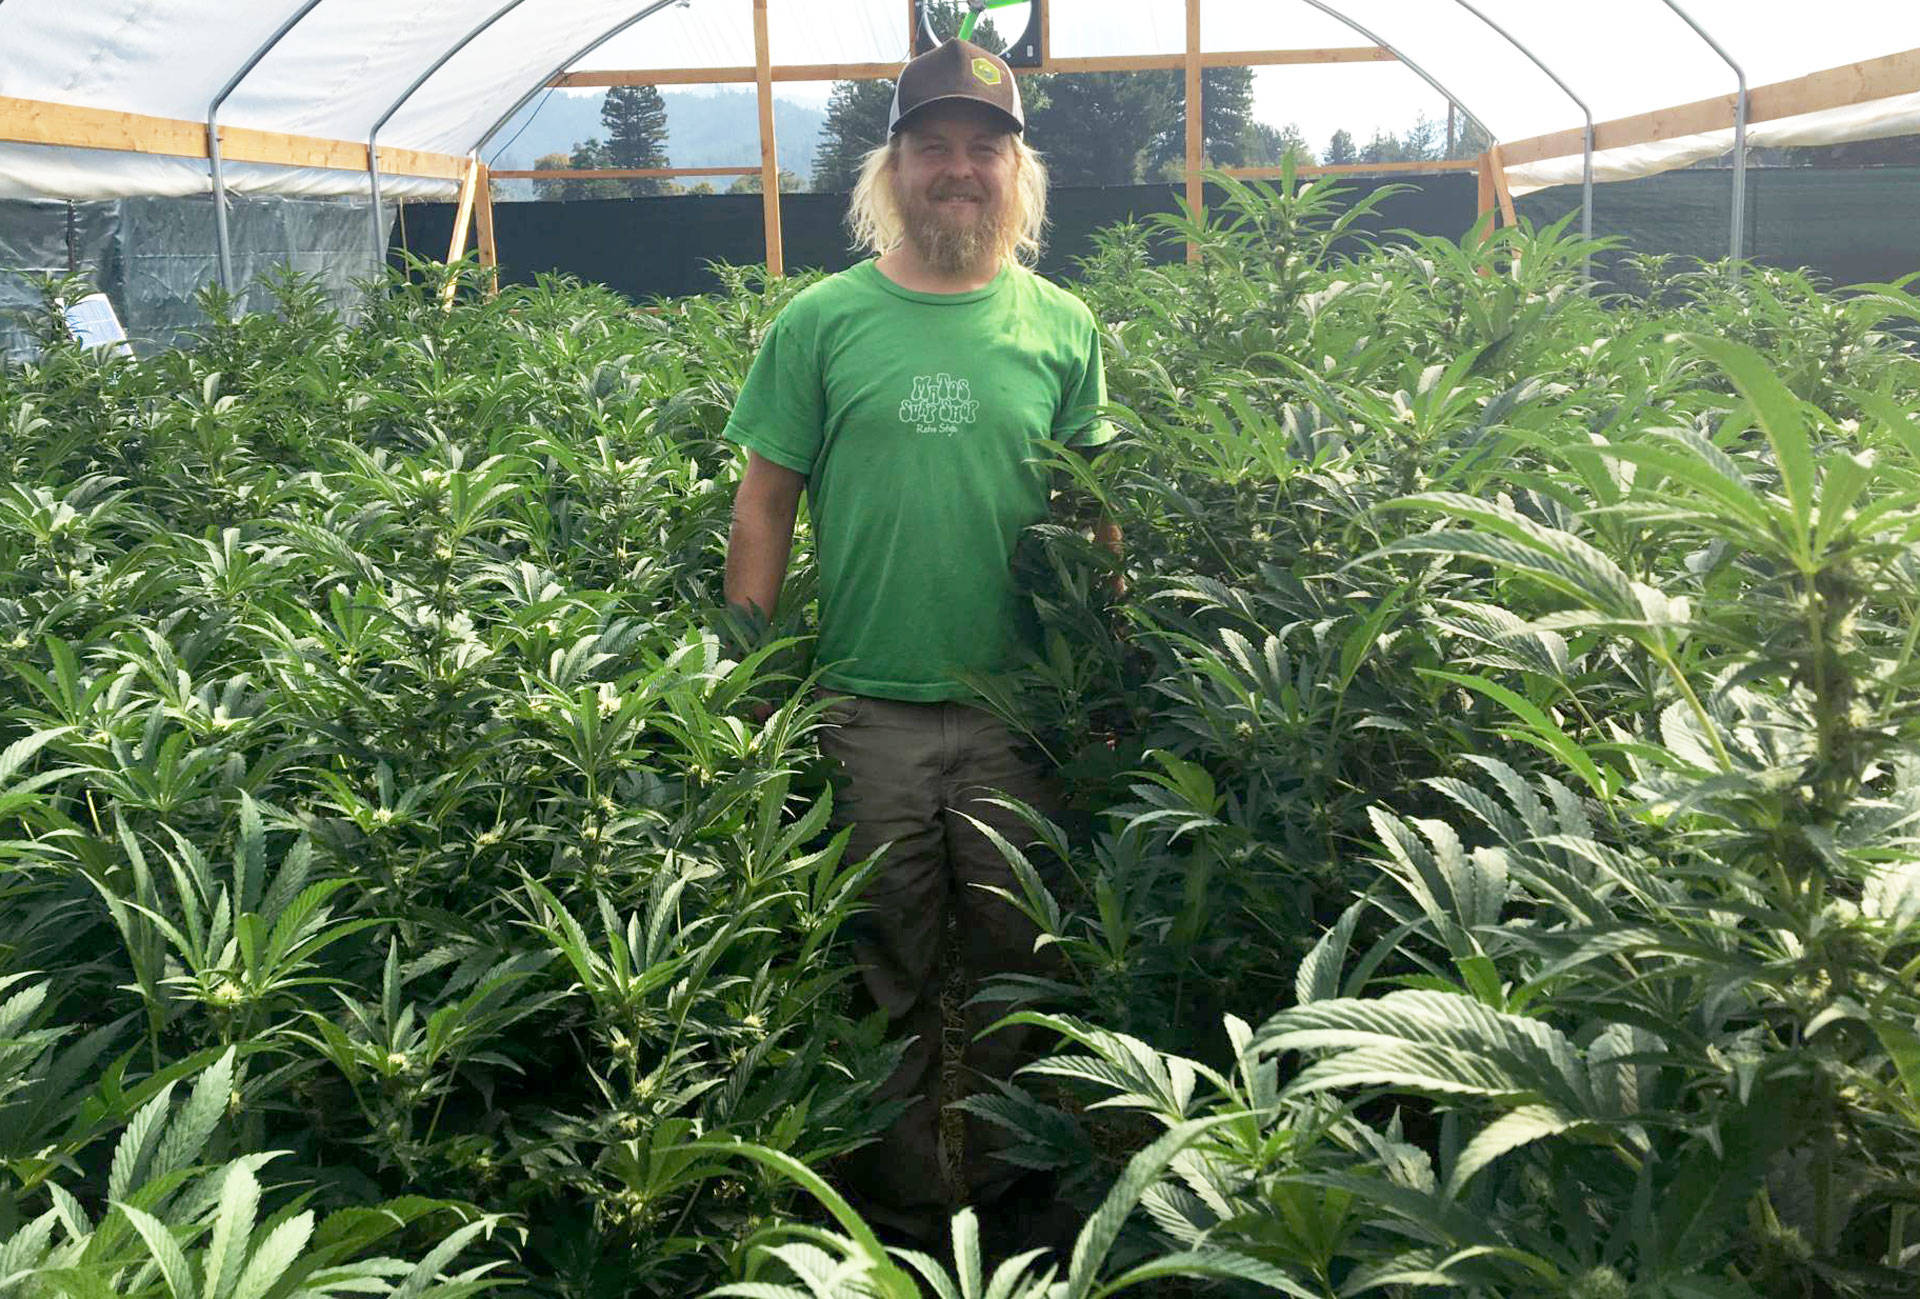 Small marijuana growers like Noah Beck in Humboldt County hope 'connoisseur cannabis' will help them compete with larger corporate growers.  Sam Harnett/KQED